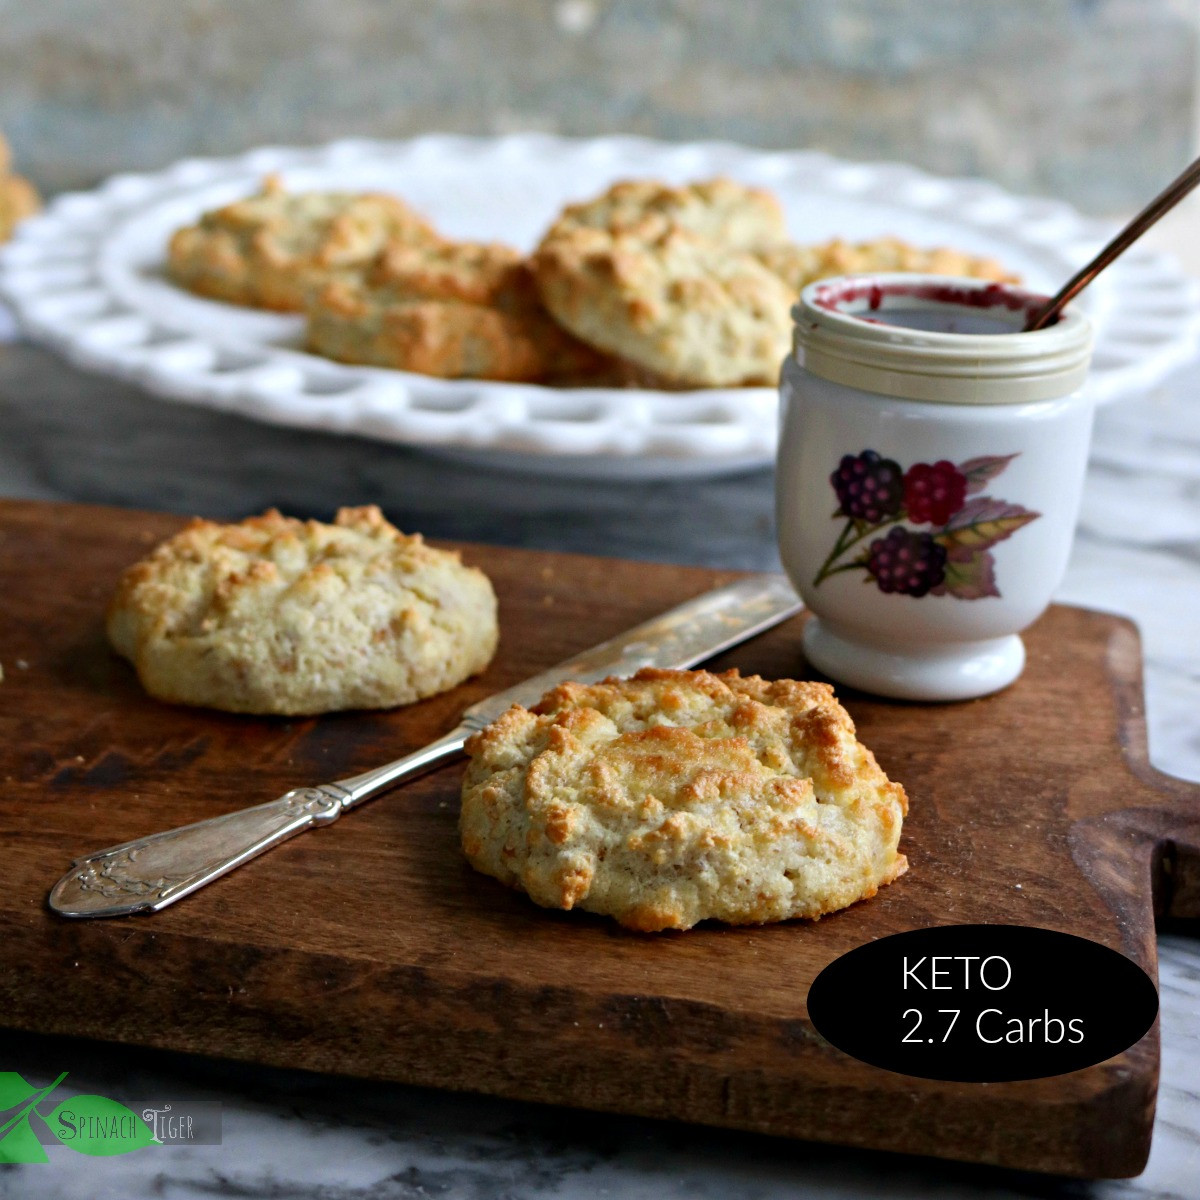 Keto Biscuit Recipe
 How to Make Grain Free Biscuits Paleo Keto Friendly